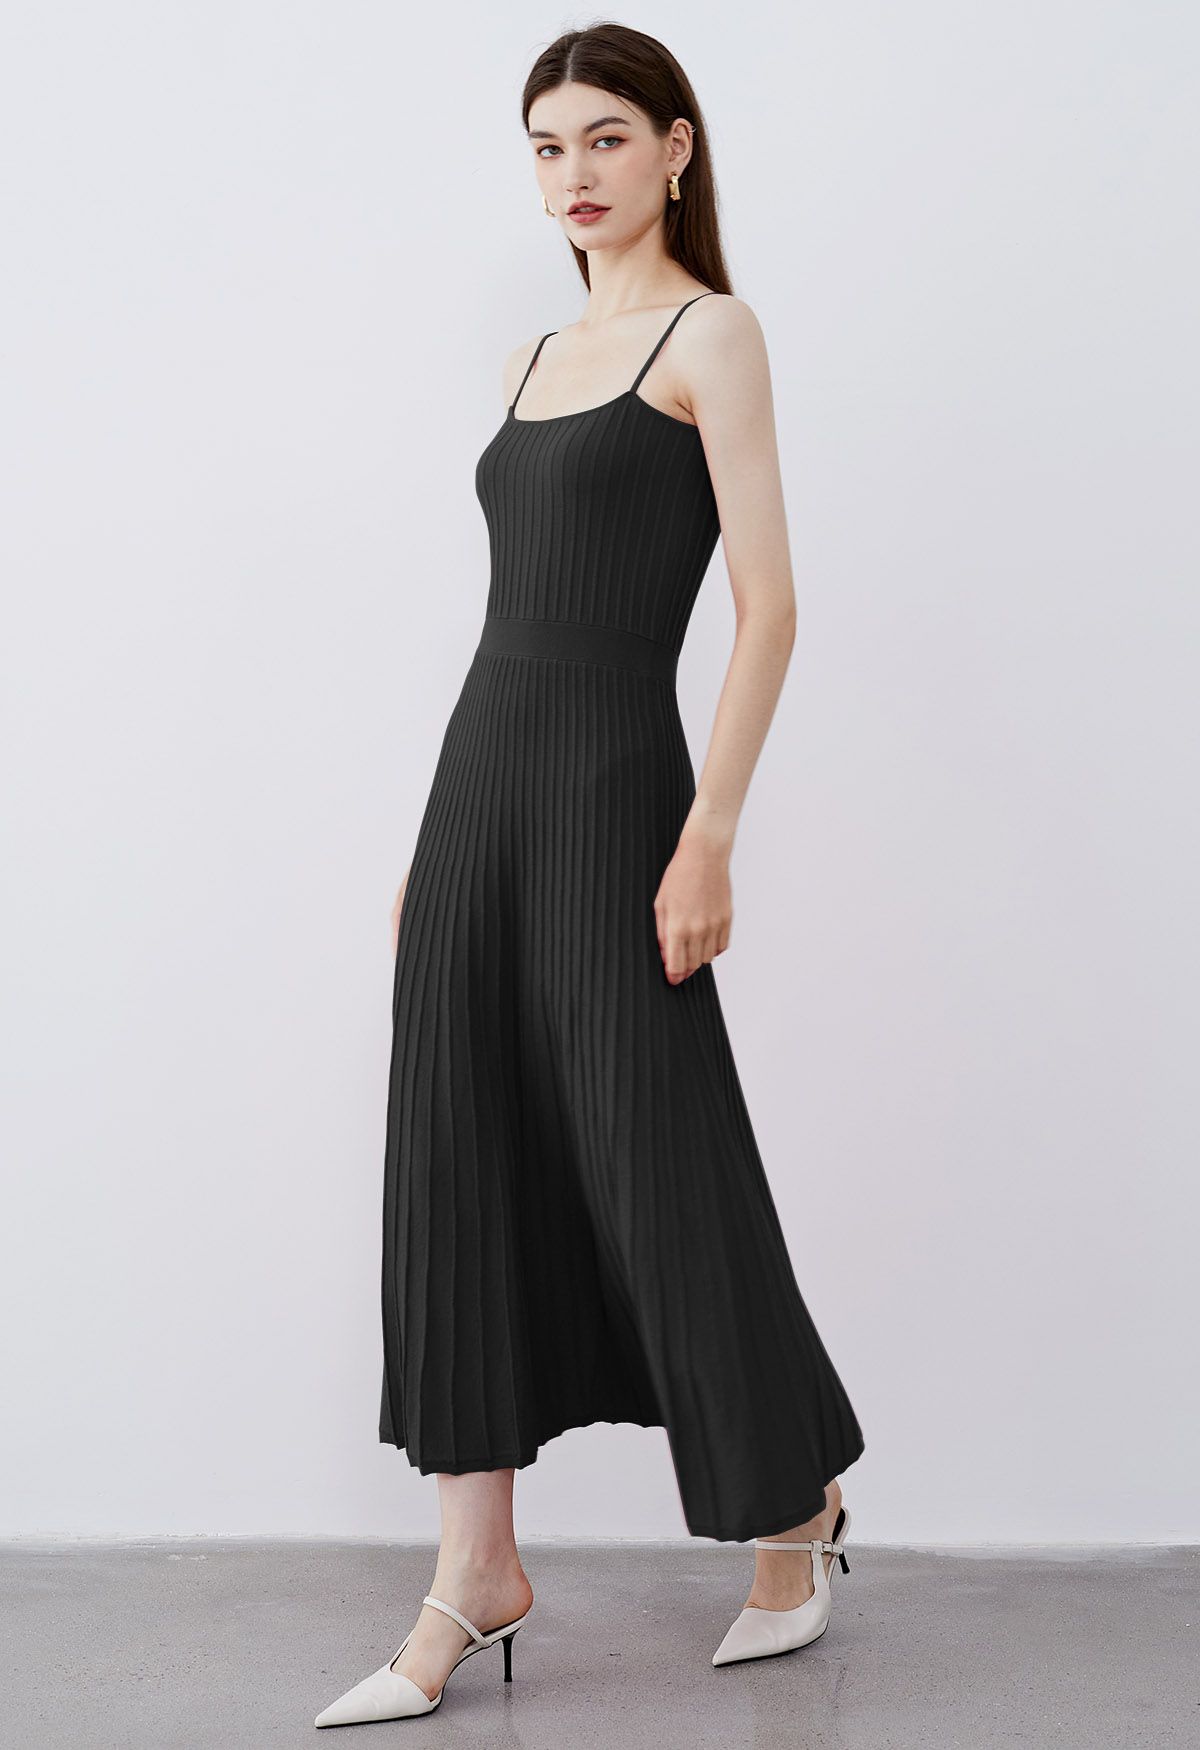 Solid Pleated Knit Cami Dress in Black